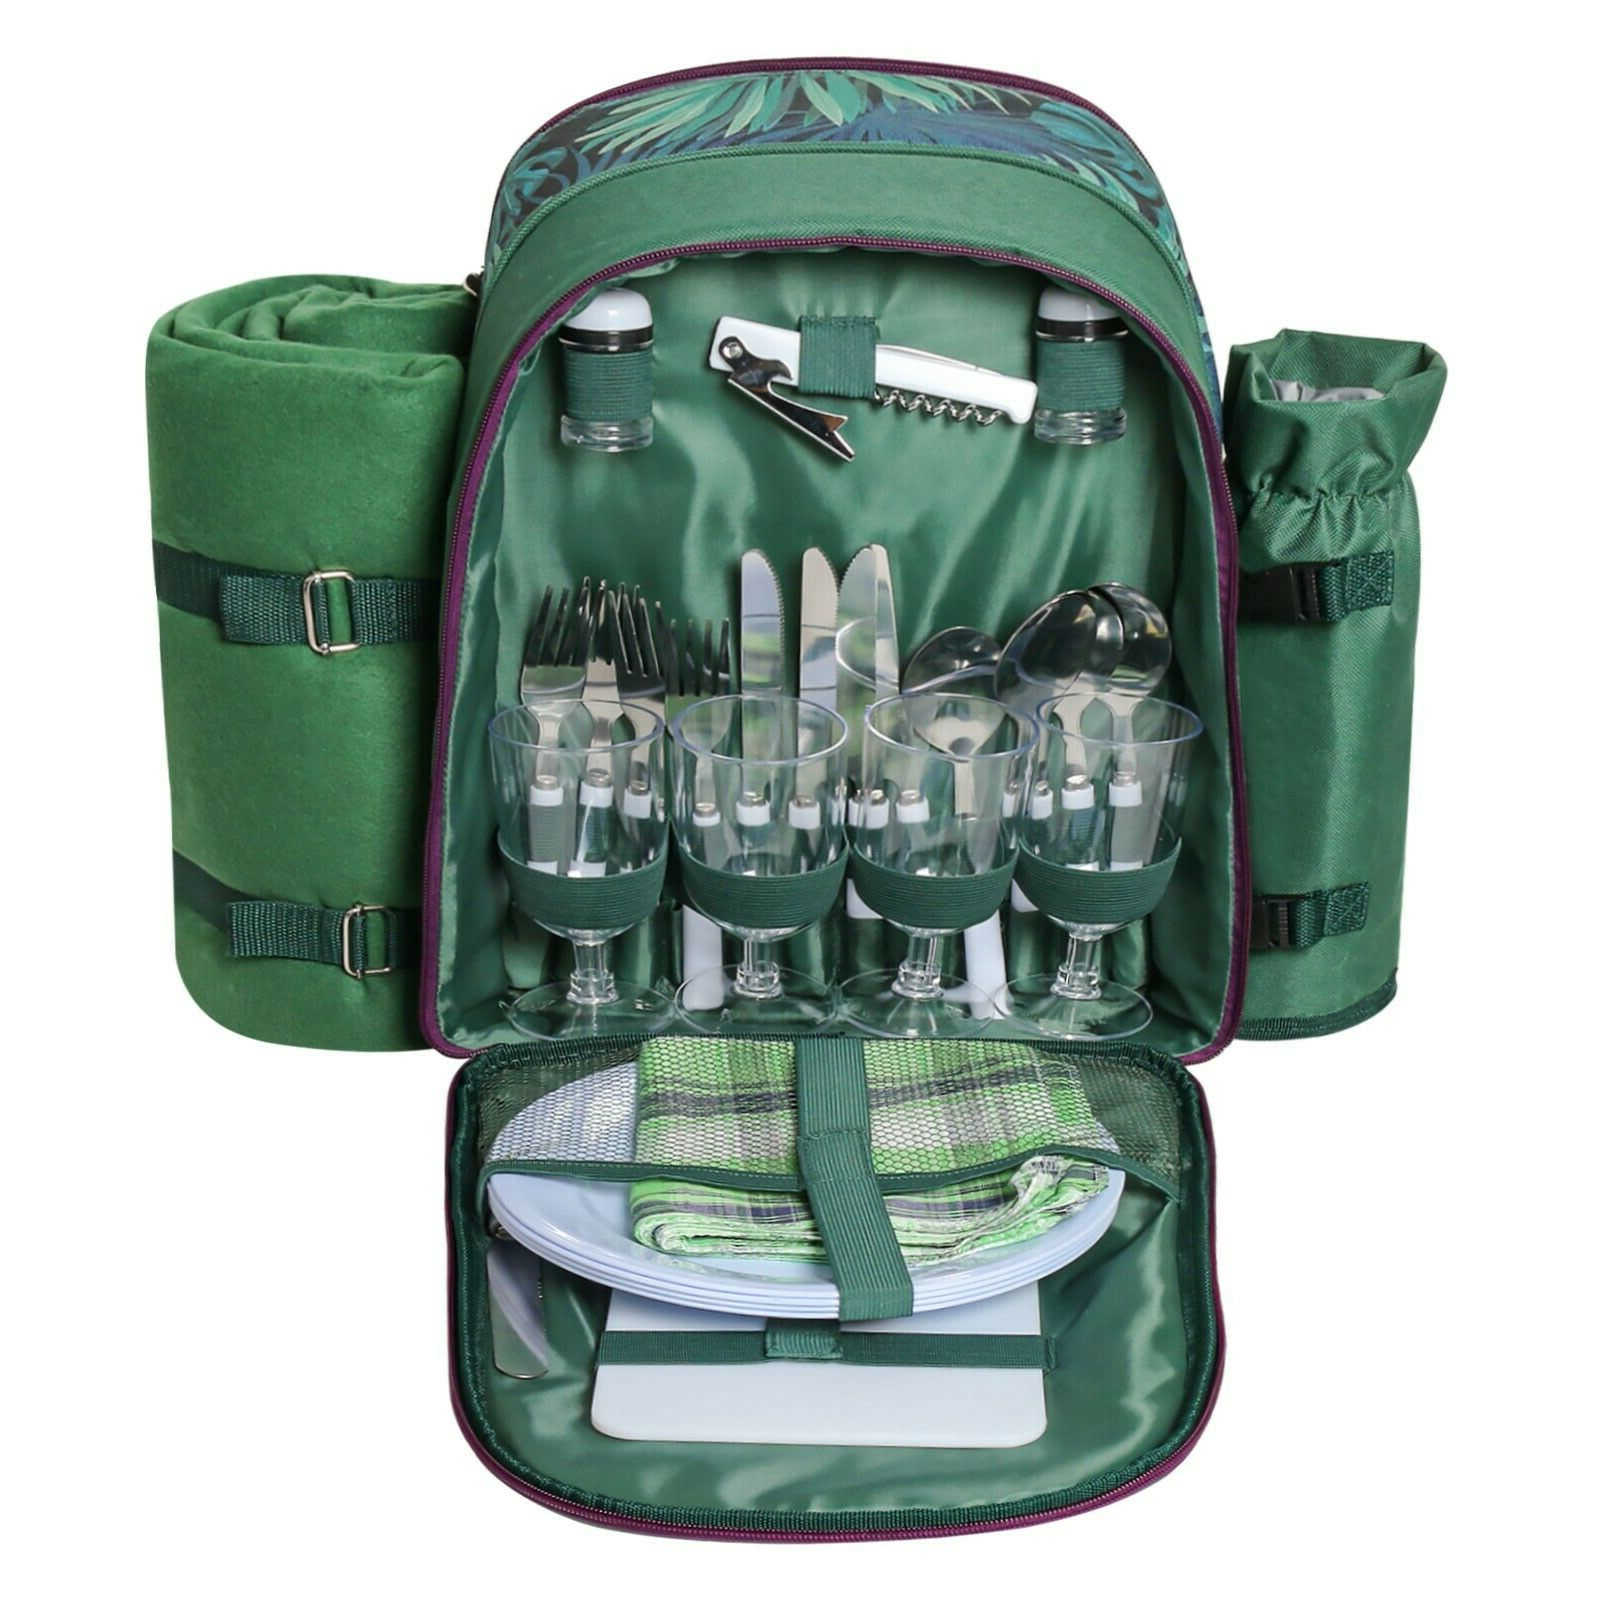 Fable camp Autonomy Picnic Backpack Set With Cutlery Kit Cooler Compartment Blanket For 4  Persons | eBay